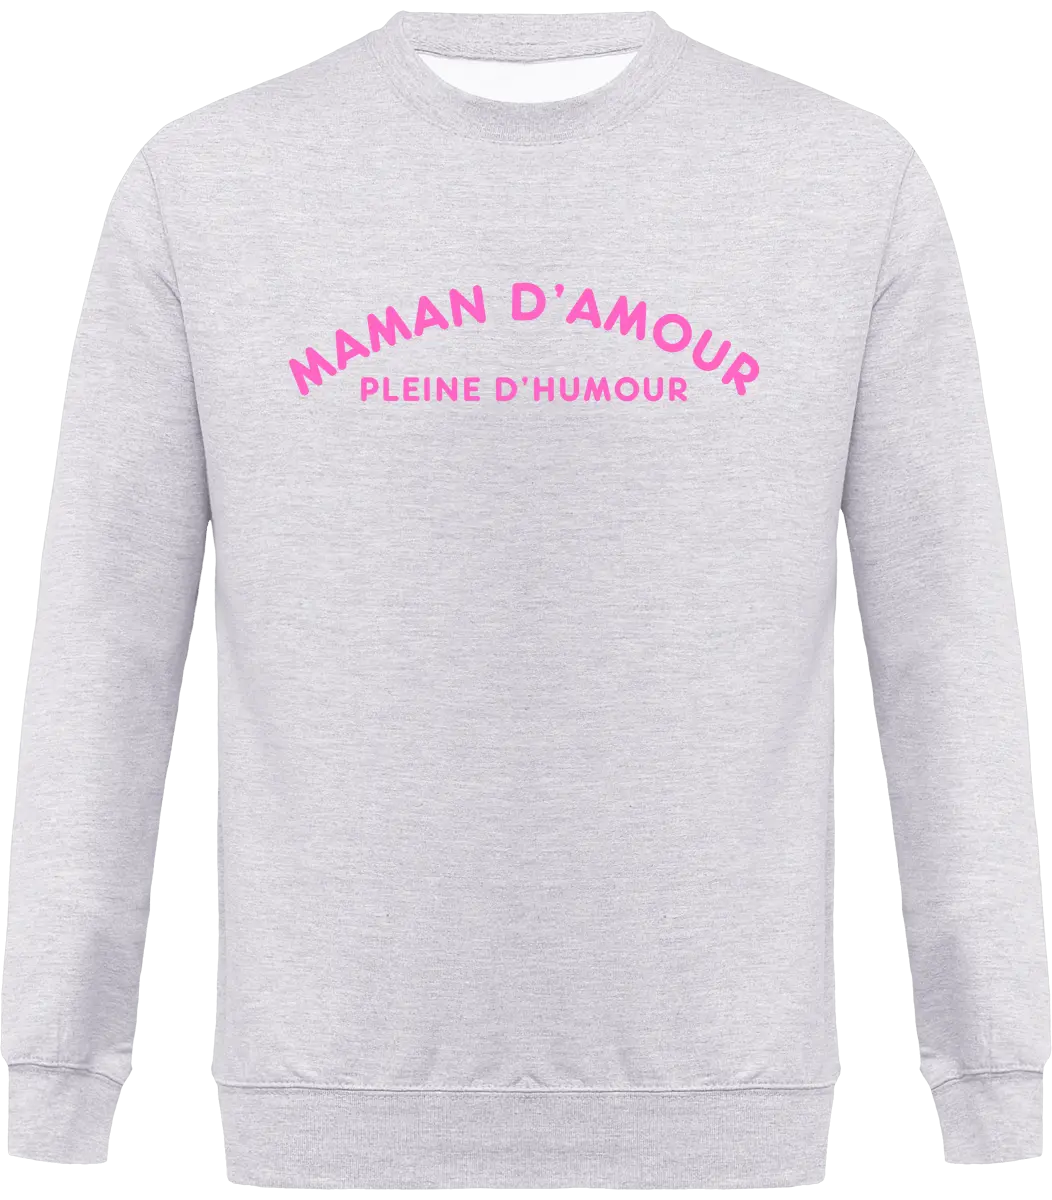 Sweat maman "Maman d'amour pleine d'humour" | Mixte - French Humour